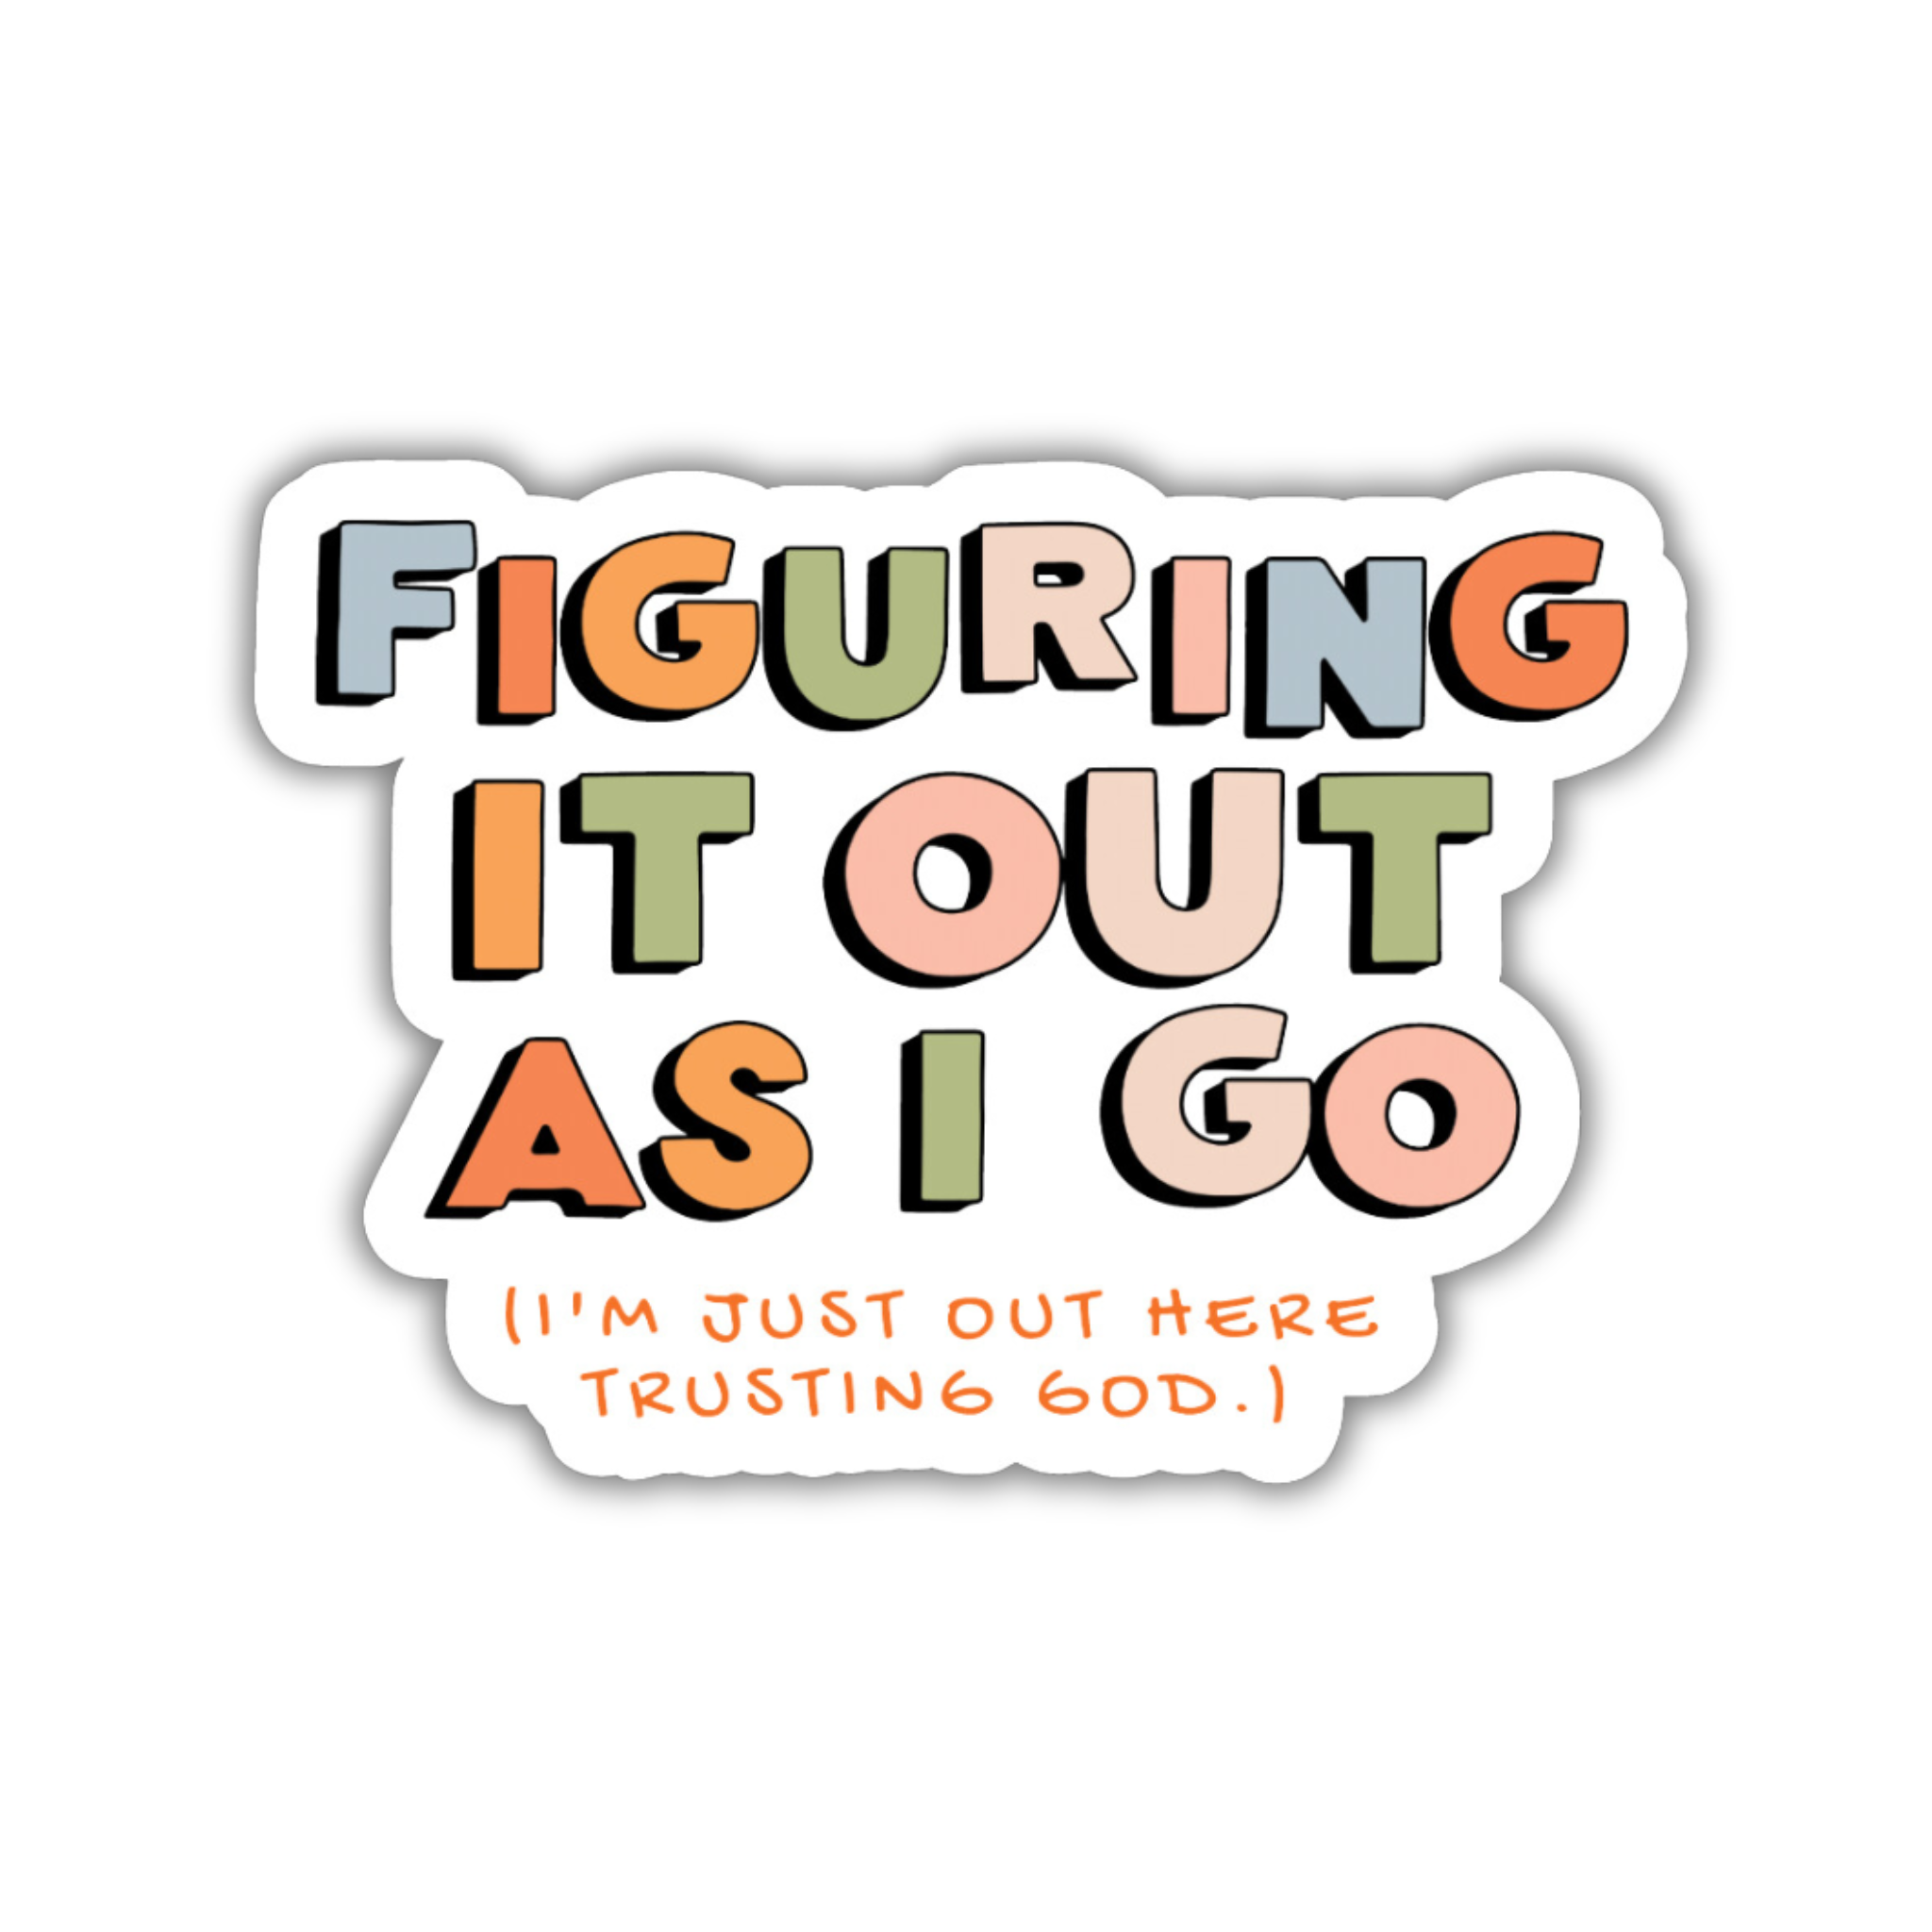 Figuring It Out As I Go (I'm Just Out Here Trusting God) Sticker